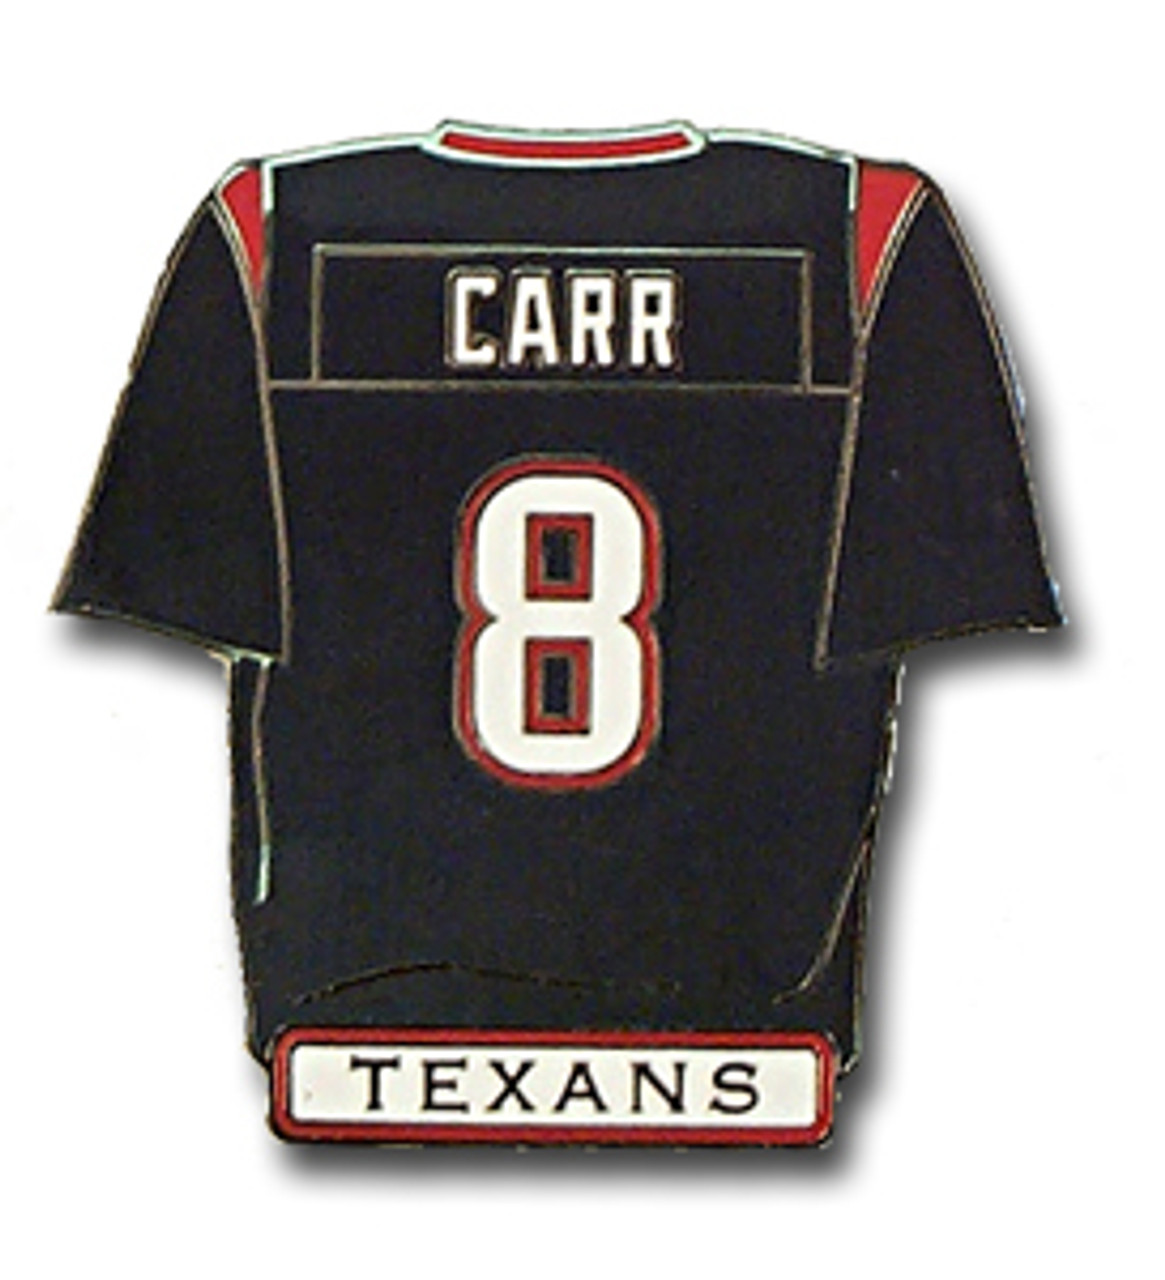 derek carr jersey with captain patch